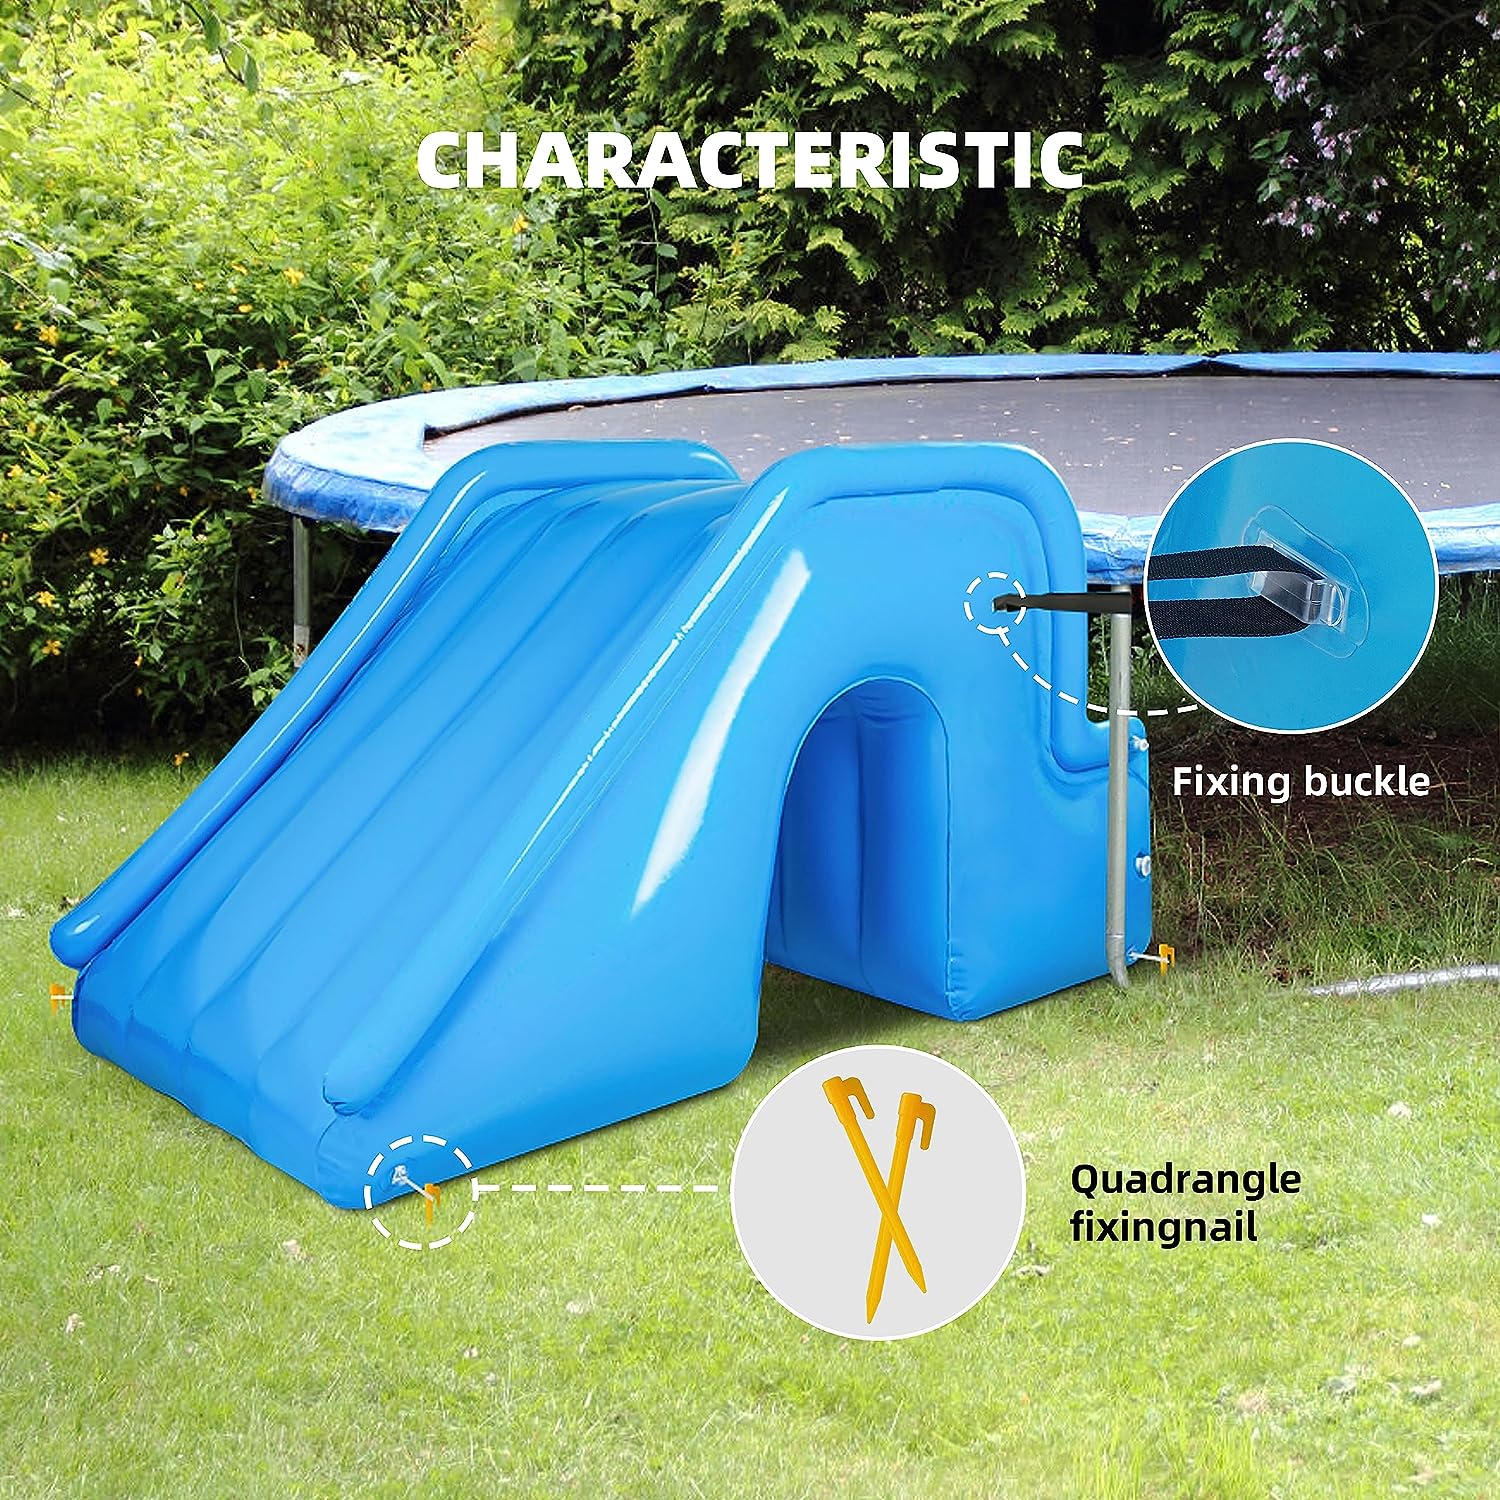 HOOSUNNY Inflatable Pool Slide Review